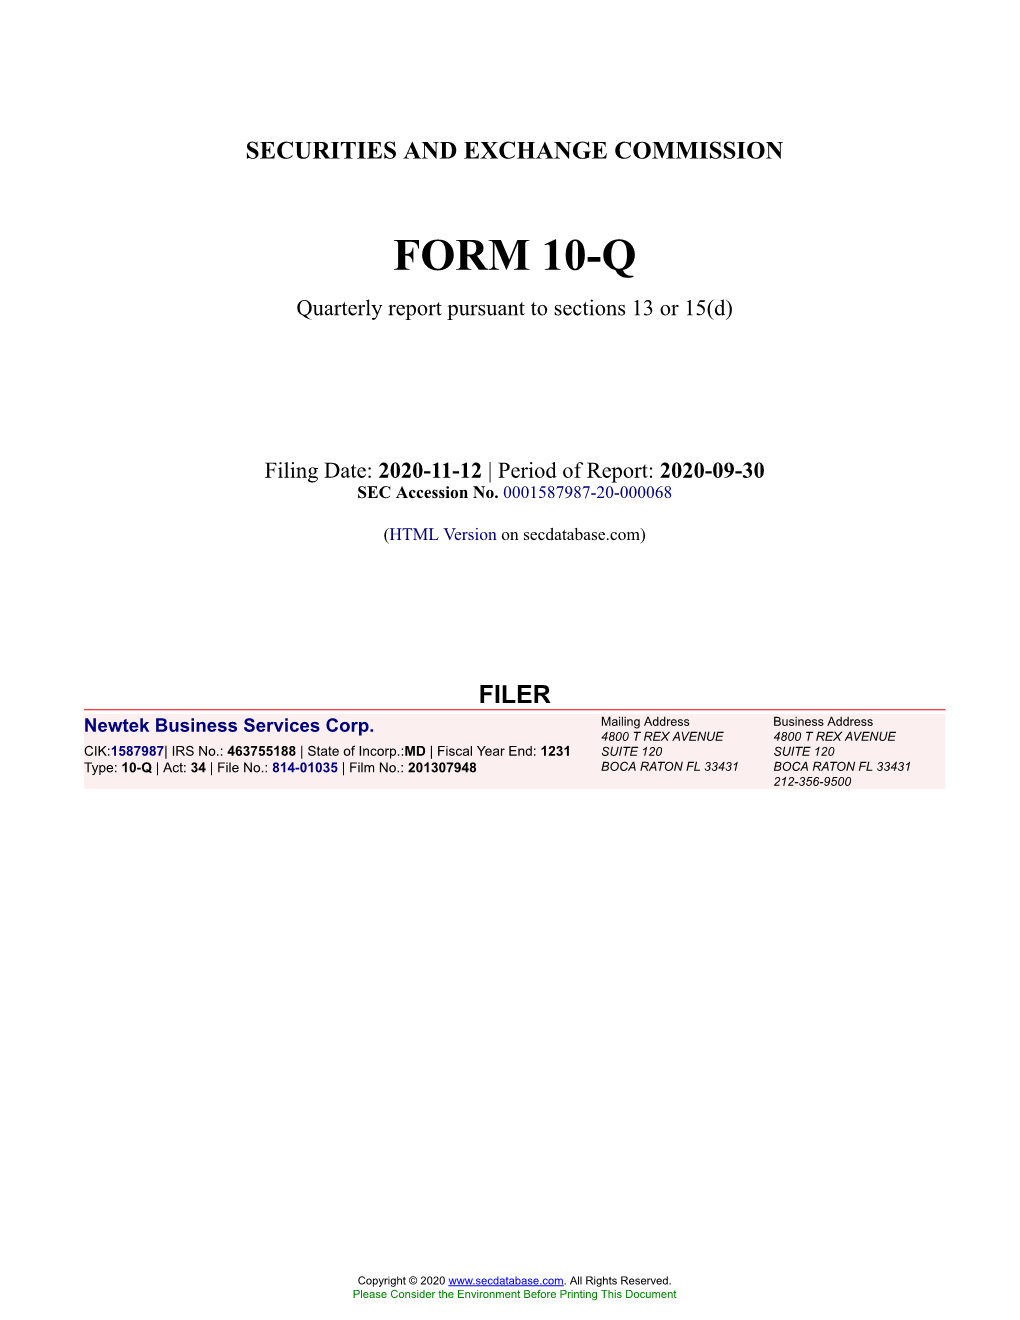 Newtek Business Services Corp. Form 10-Q Quarterly Report Filed 2020